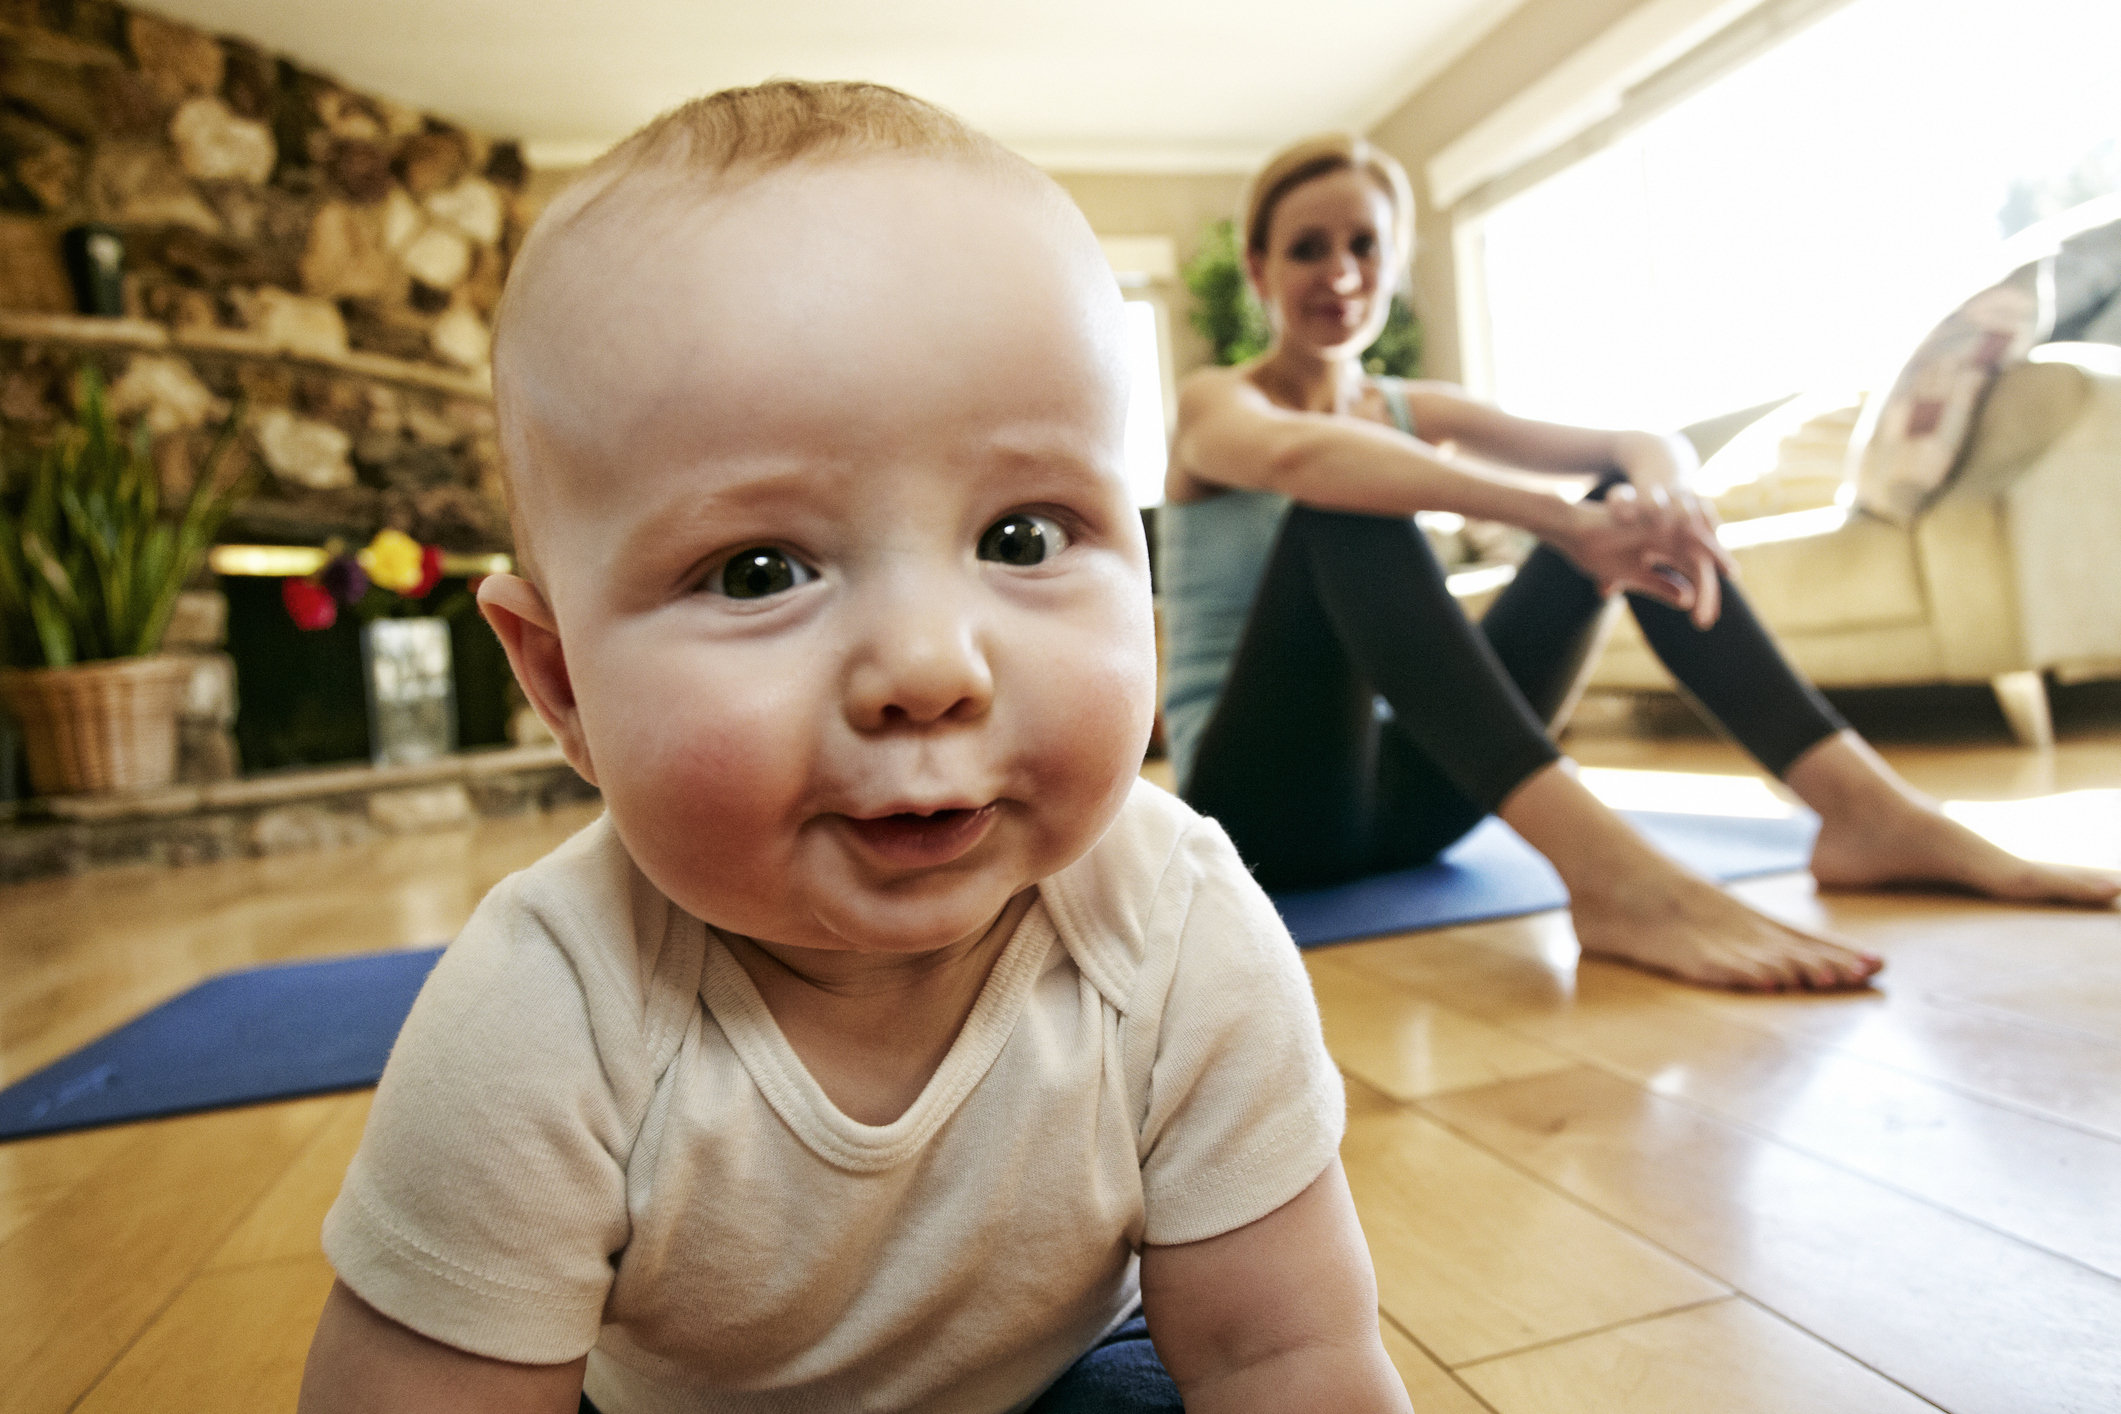 Infant on all fours in foreground with smiling woman seated in background